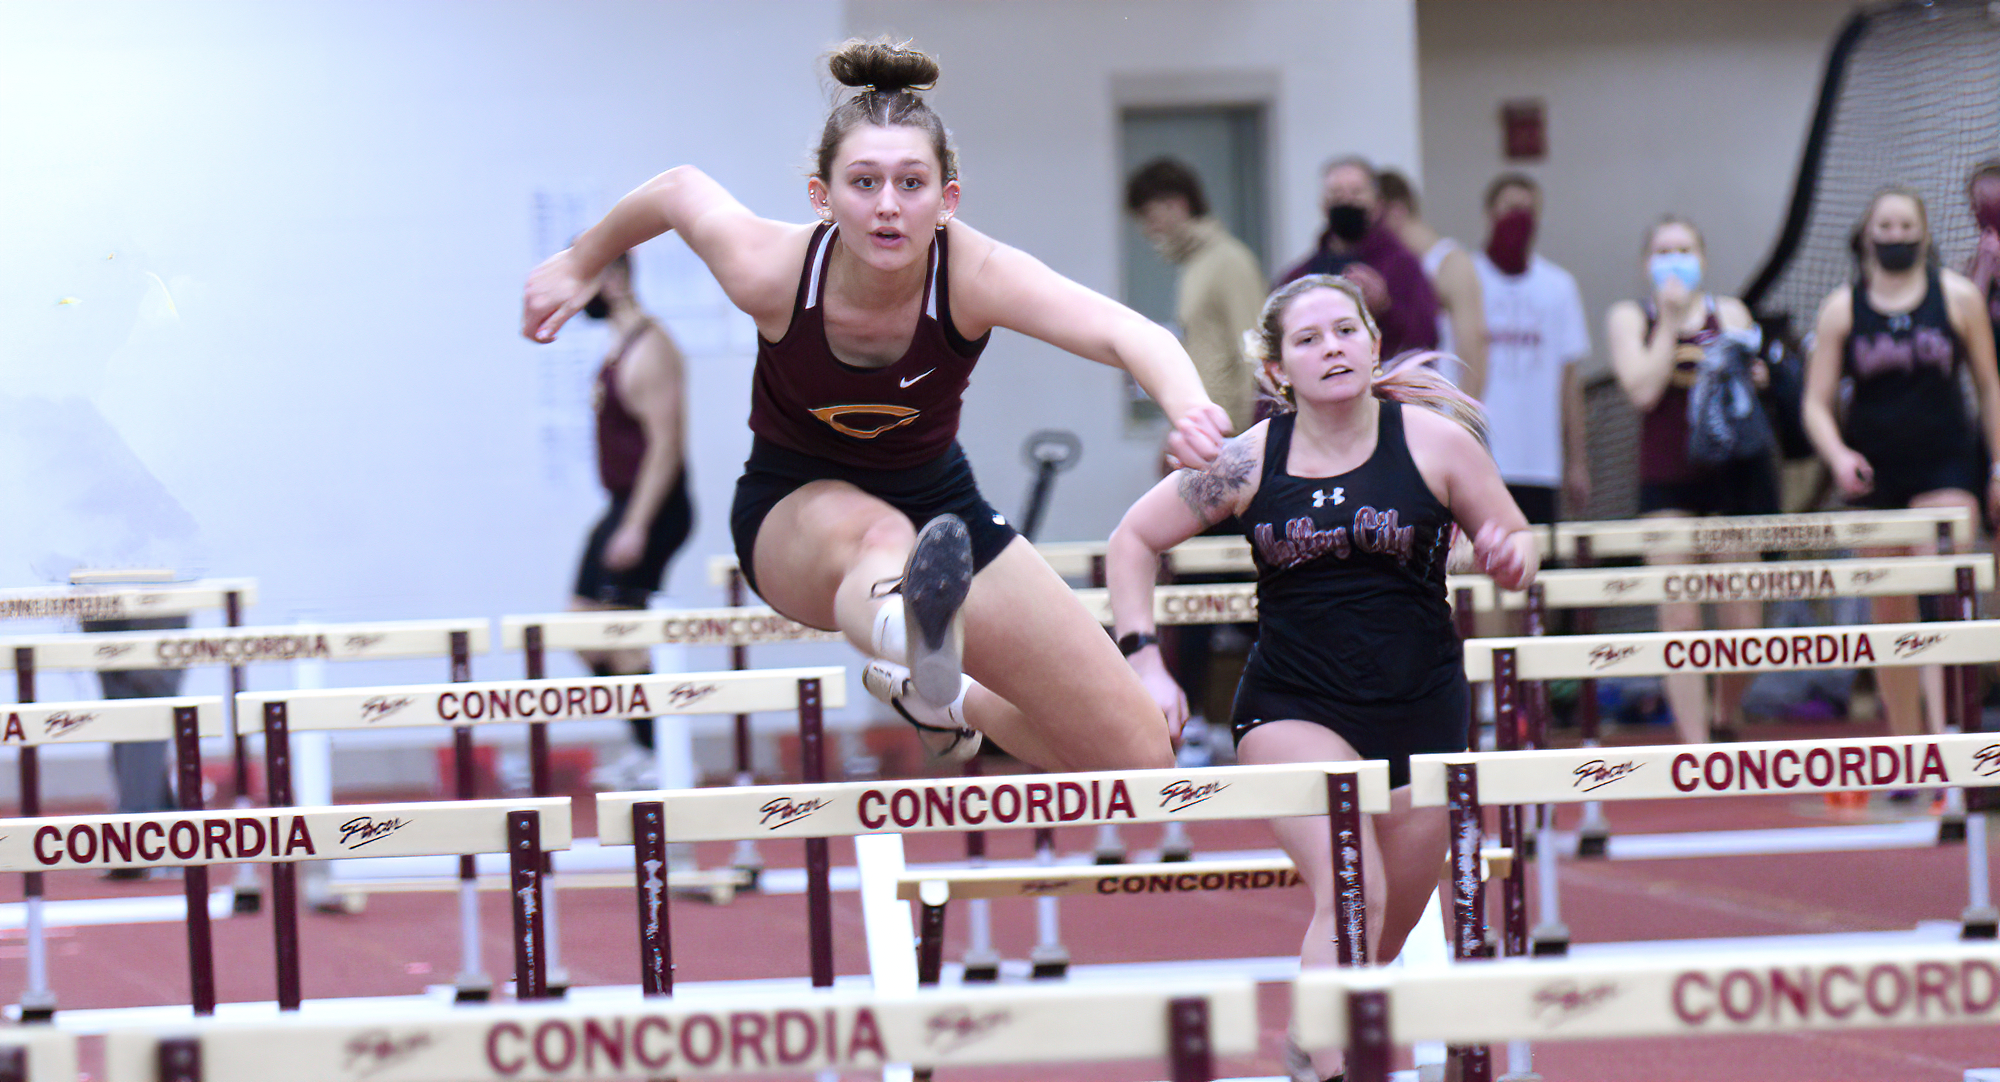 Freshman Peyton Selle posted the top score in the heptathlon in the MIAC season when she scored 3,876 points at the CSB Milti-Event Meet.